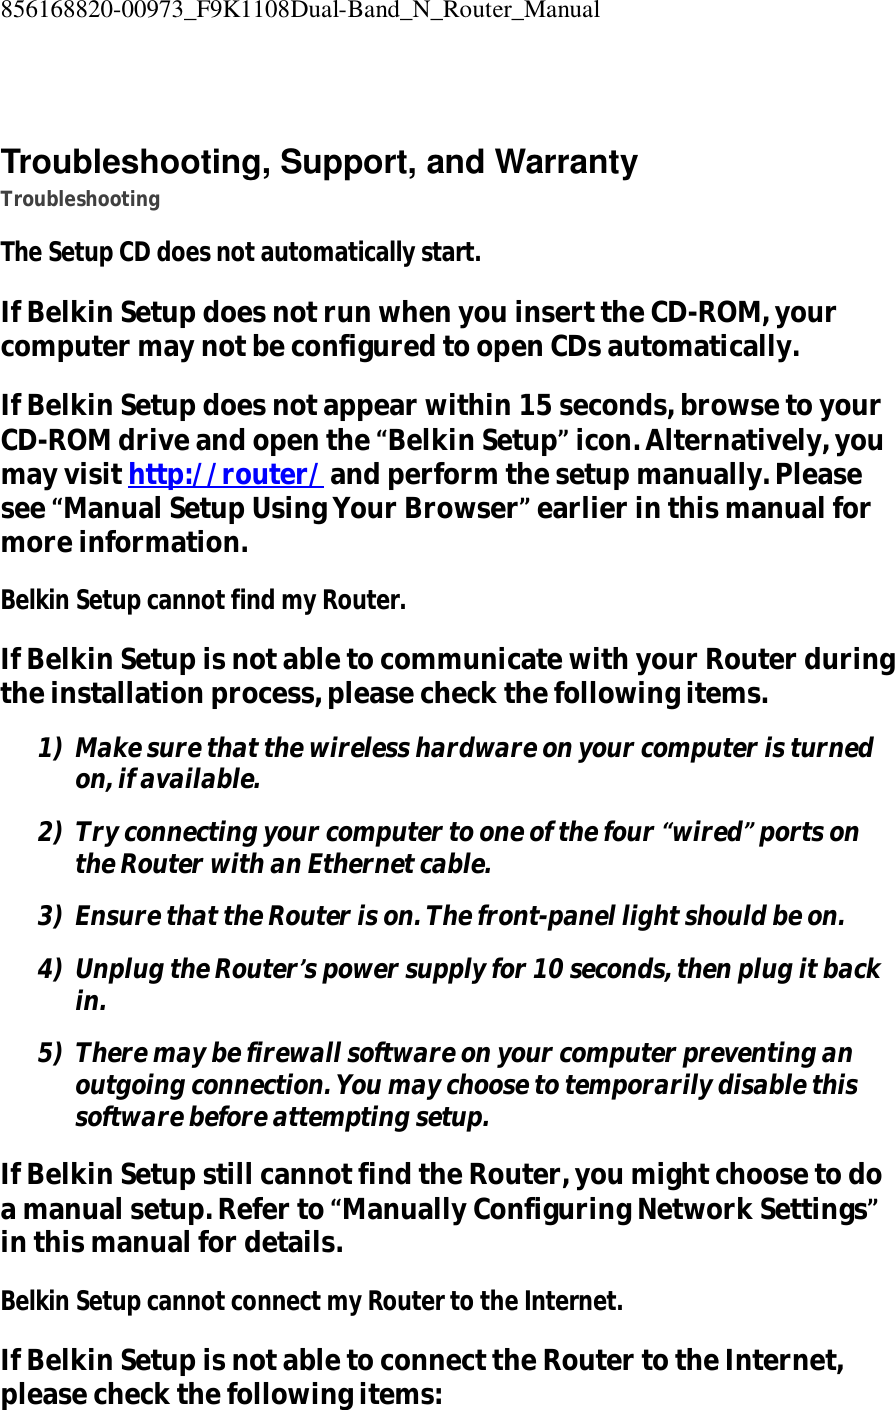 856168820-00973_F9K1108Dual-Band_N_Router_Manual   Troubleshooting, Support, and Warranty Troubleshooting The Setup CD does not automatically start. If Belkin Setup does not run when you insert the CD-ROM, your computer may not be configured to open CDs automatically. If Belkin Setup does not appear within 15 seconds, browse to your CD-ROM drive and open the “Belkin Setup” icon. Alternatively, you may visit http://router/ and perform the setup manually. Please see “Manual Setup Using Your Browser” earlier in this manual for more information. Belkin Setup cannot find my Router. If Belkin Setup is not able to communicate with your Router during the installation process, please check the following items. 1) Make sure that the wireless hardware on your computer is turned on, if available. 2) Try connecting your computer to one of the four “wired” ports on the Router with an Ethernet cable. 3) Ensure that the Router is on. The front-panel light should be on. 4) Unplug the Router’s power supply for 10 seconds, then plug it back in. 5) There may be firewall software on your computer preventing an outgoing connection. You may choose to temporarily disable this software before attempting setup. If Belkin Setup still cannot find the Router, you might choose to do a manual setup. Refer to “Manually Configuring Network Settings” in this manual for details. Belkin Setup cannot connect my Router to the Internet. If Belkin Setup is not able to connect the Router to the Internet, please check the following items: 